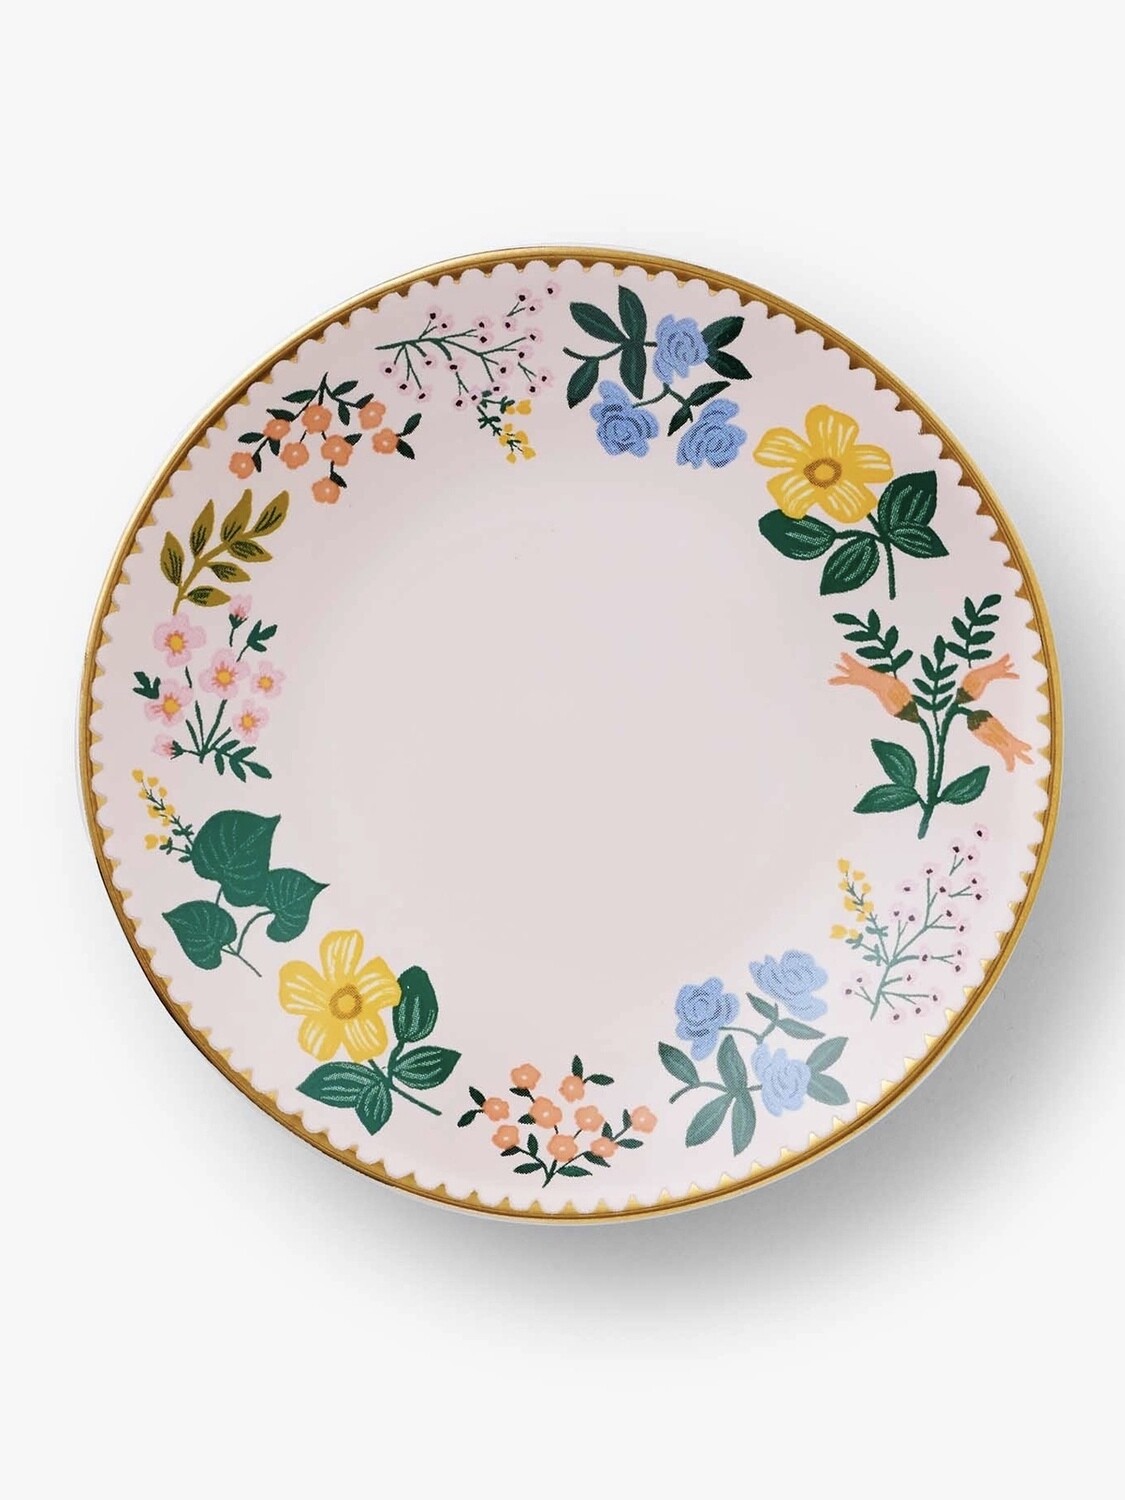 Wildwood Ring Dish - Rifle Paper Co. - RPC87